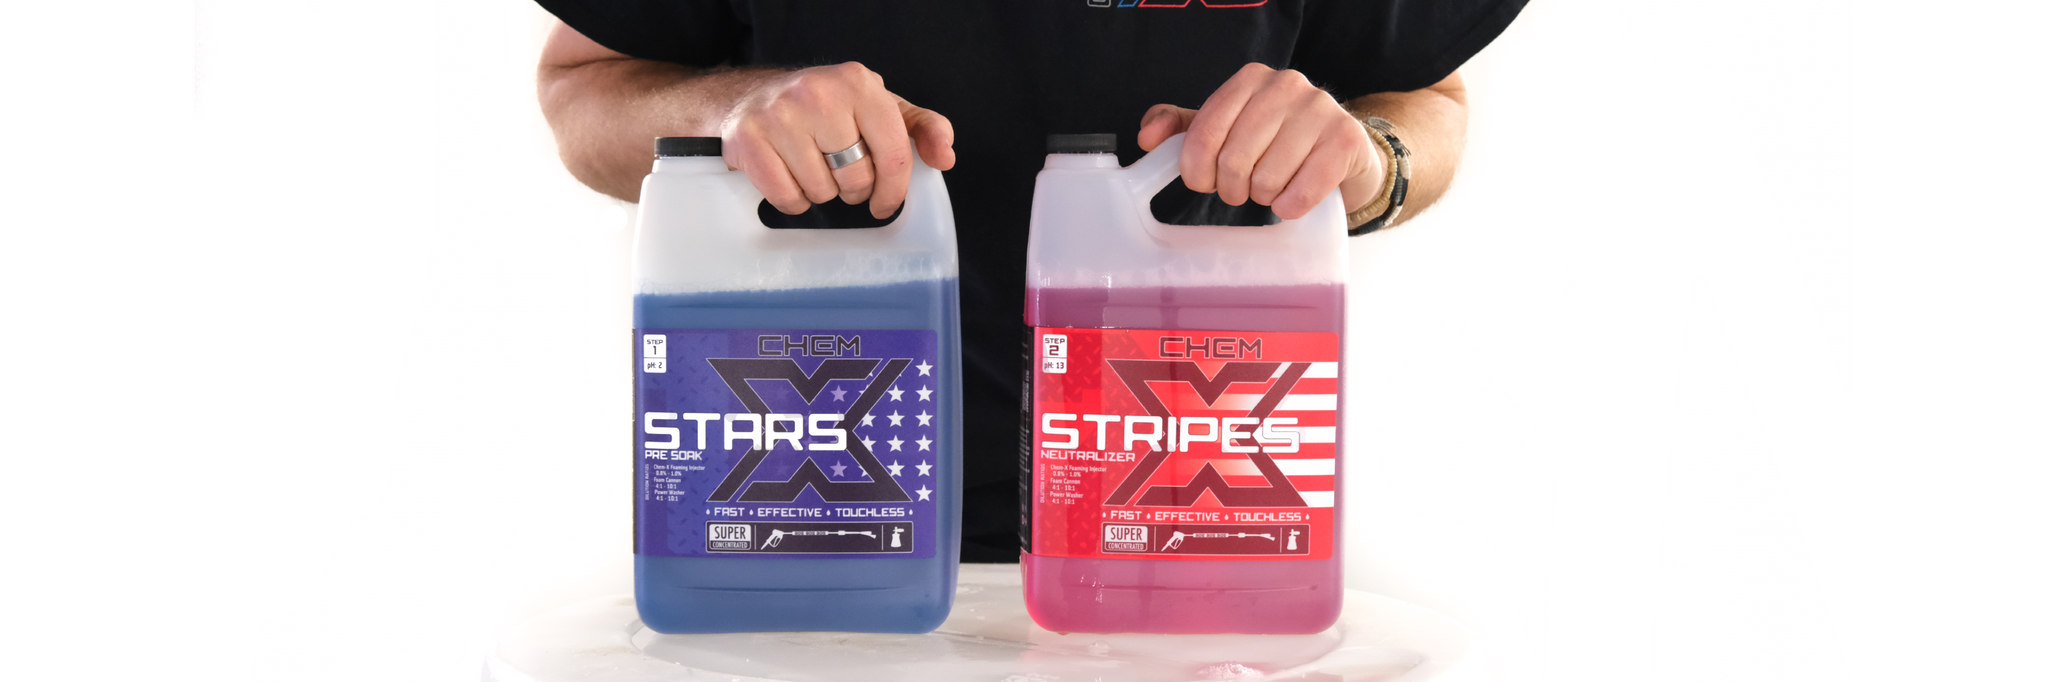 Stars+Stripes: Touchless Super Concentrates - Chem-X